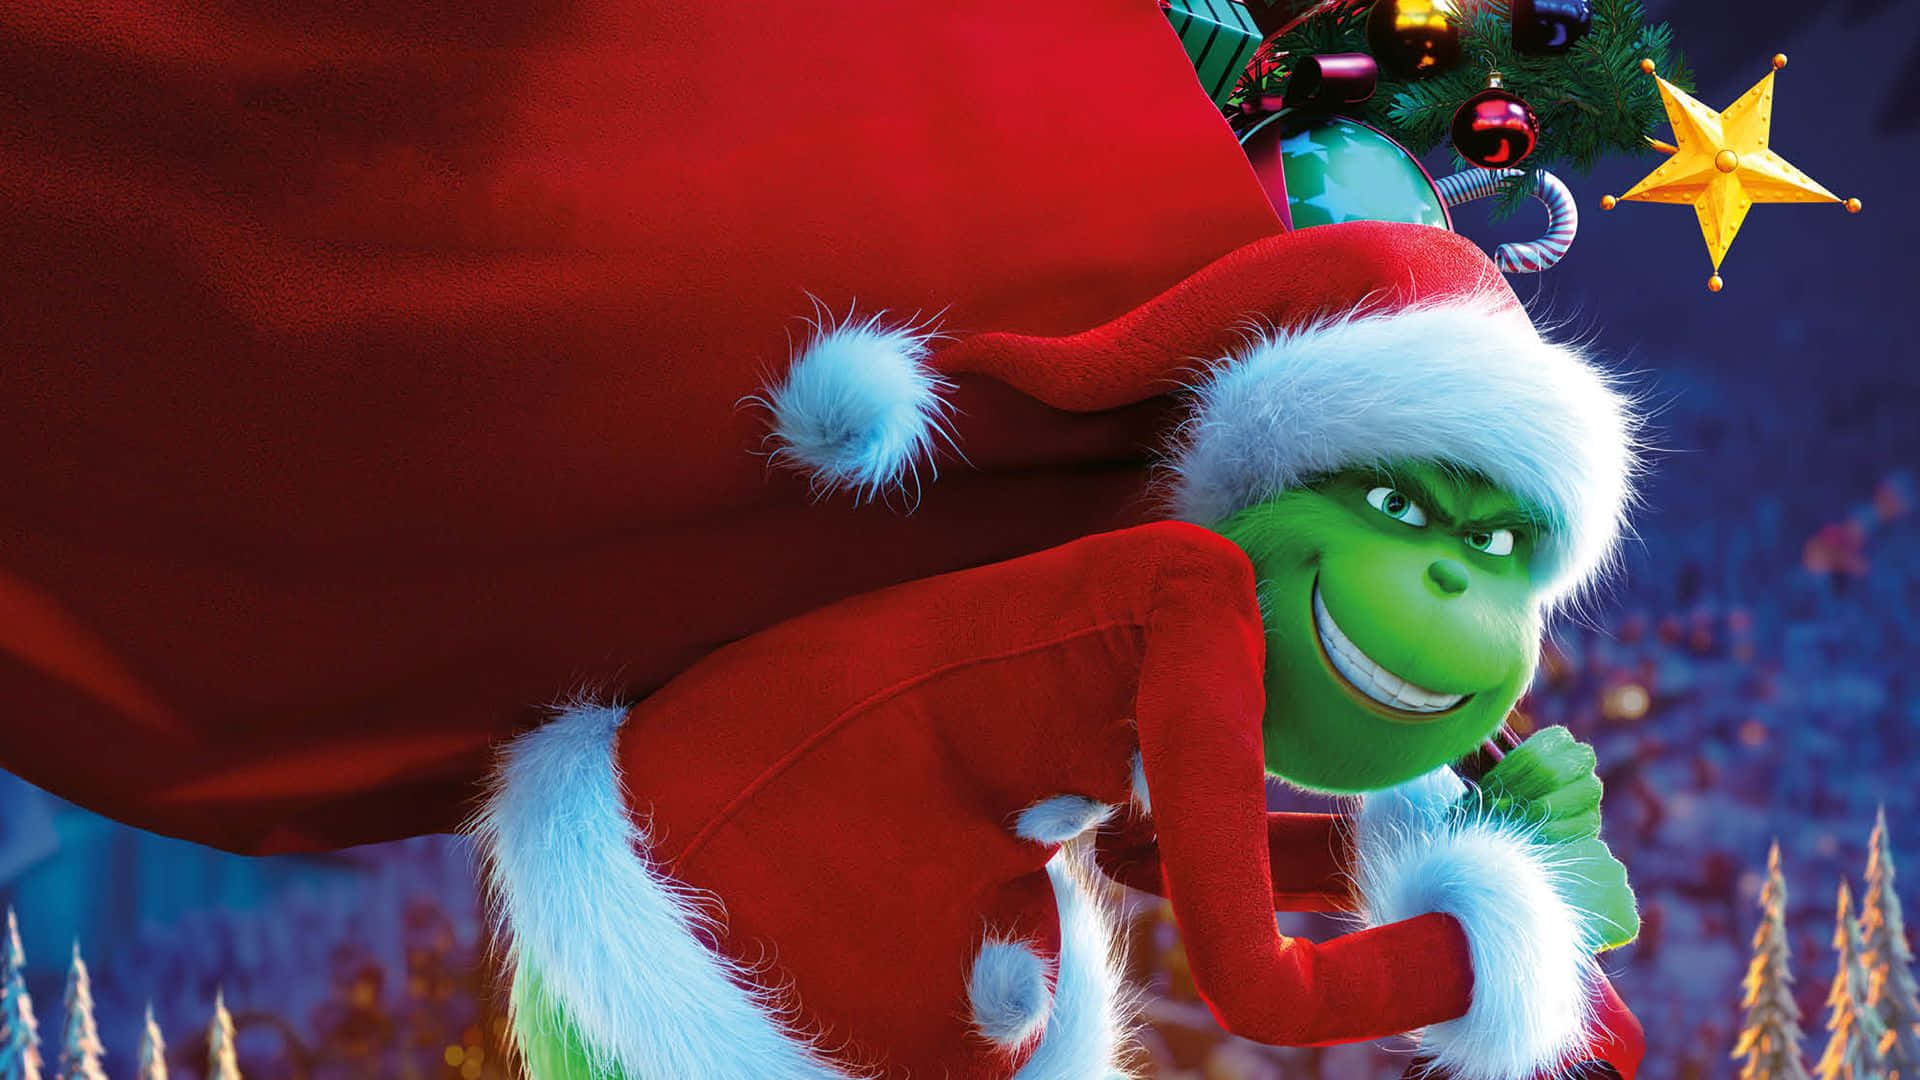 Stay connected to friends and family, even with the Grinch!